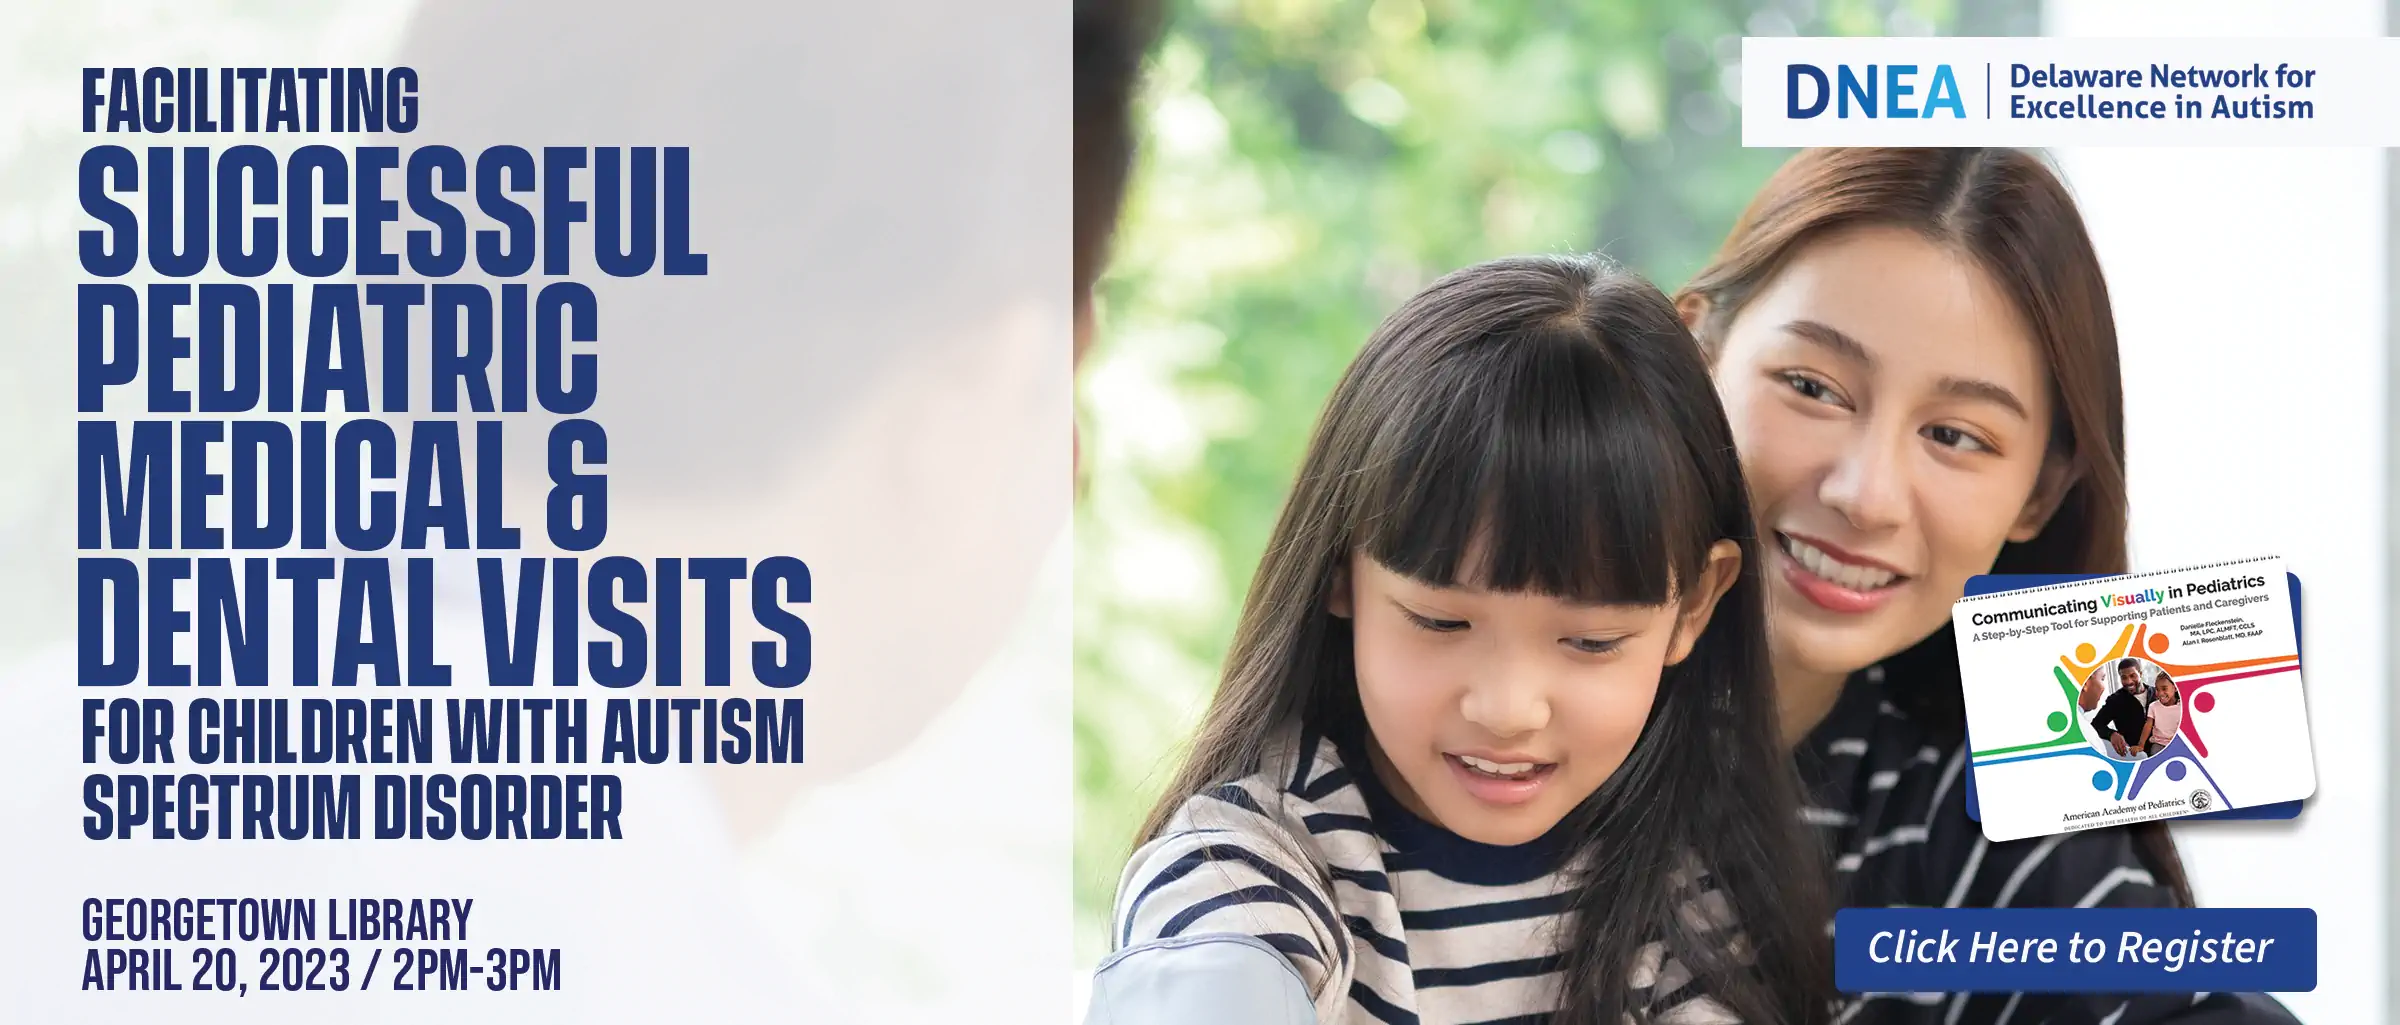 Facilitating Successful Pediatric Medical and Dental Visits for Children with Autism Spectrum Disorder at the Georgetown Public Library April 20, 2023 2-3 p.m.